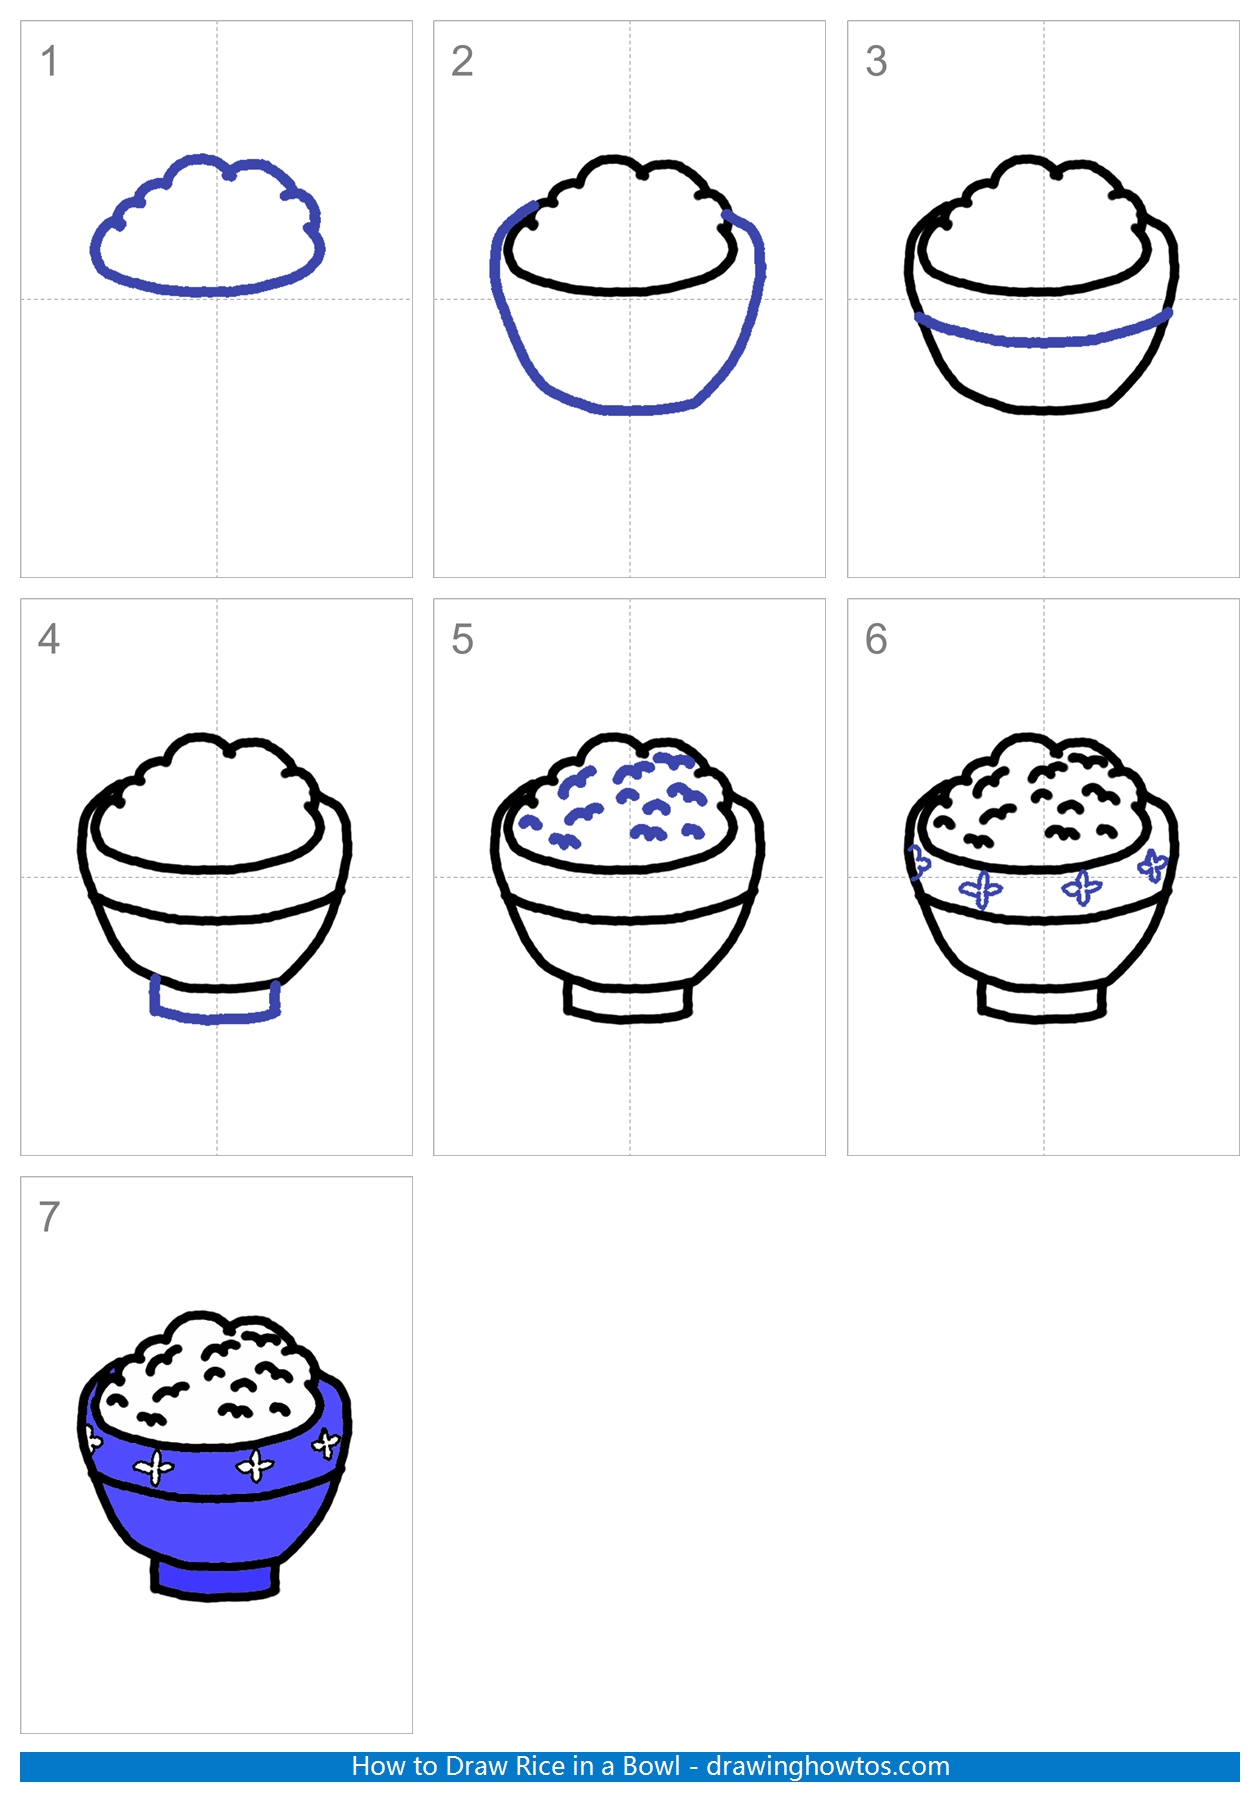 How to Draw Rice in a Bowl Step by Step